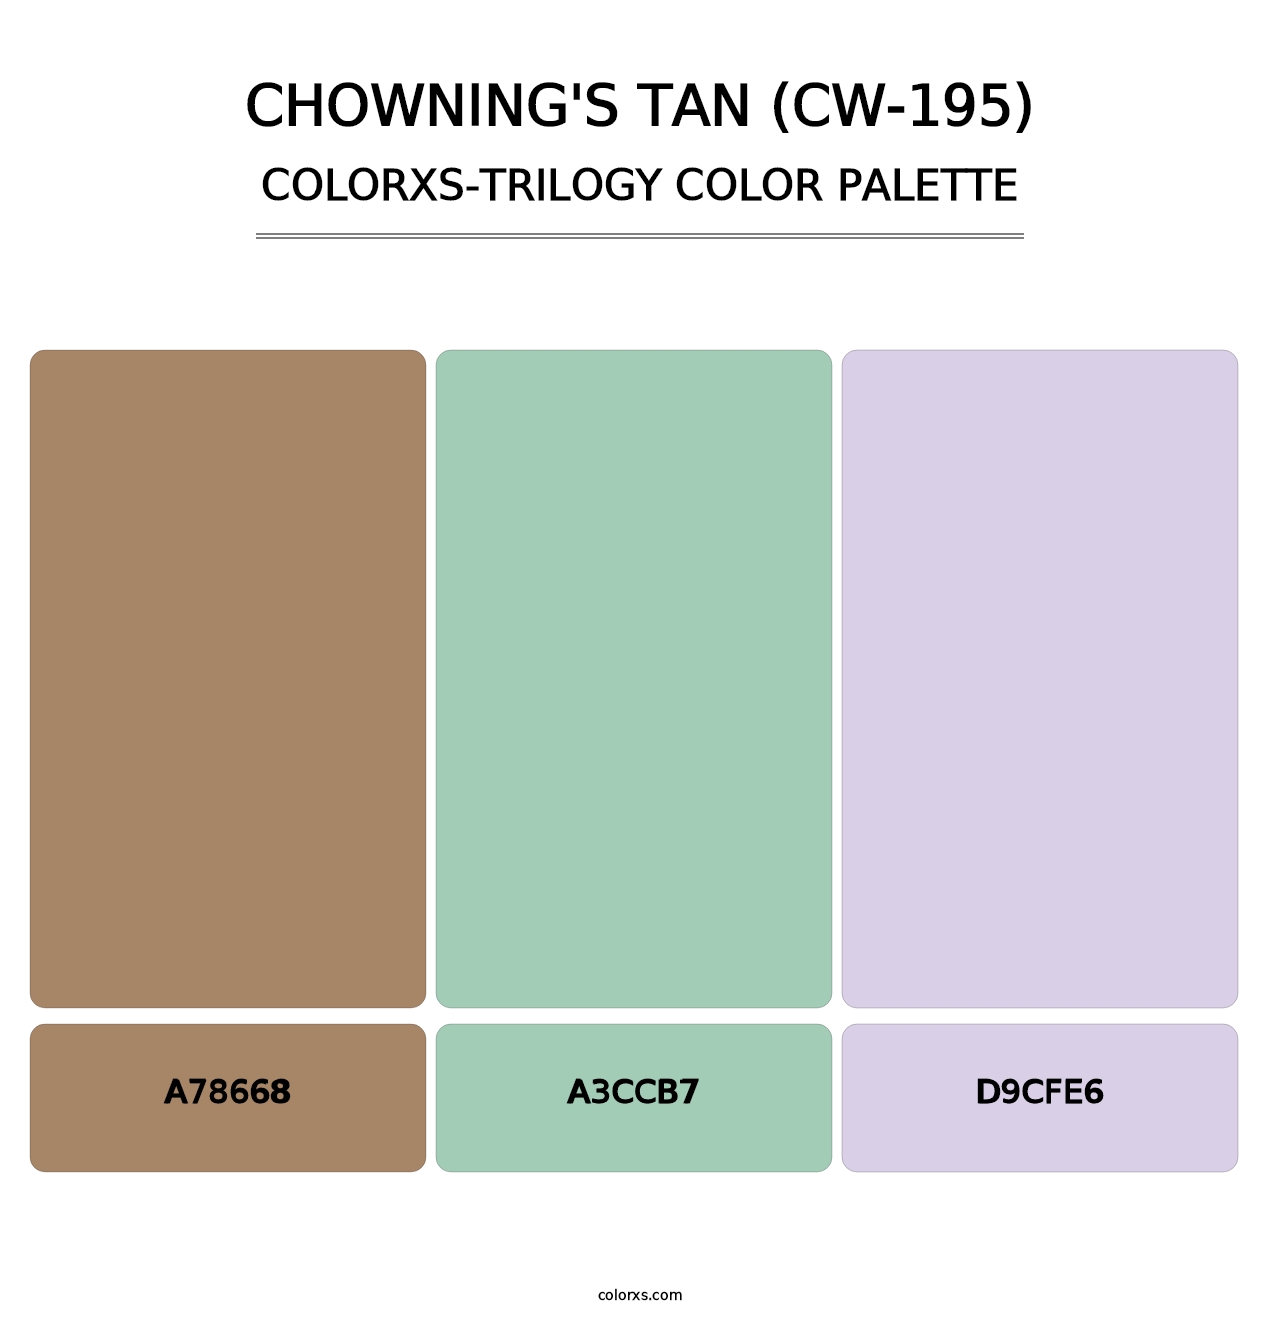 Chowning's Tan (CW-195) - Colorxs Trilogy Palette